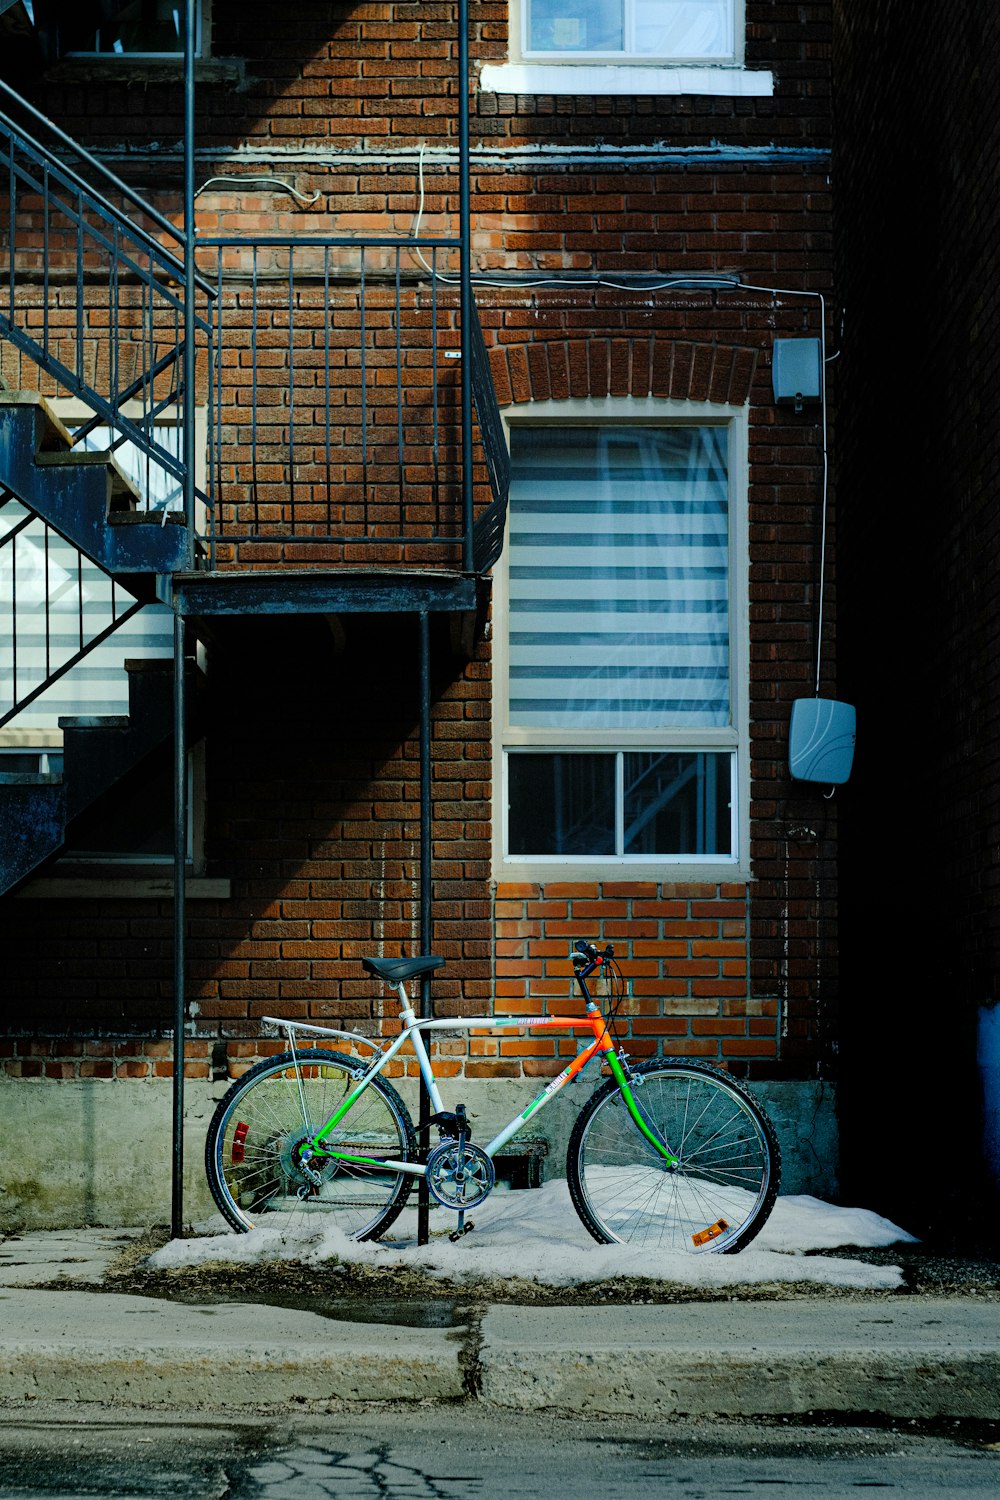 a bike is parked in front of a brick building